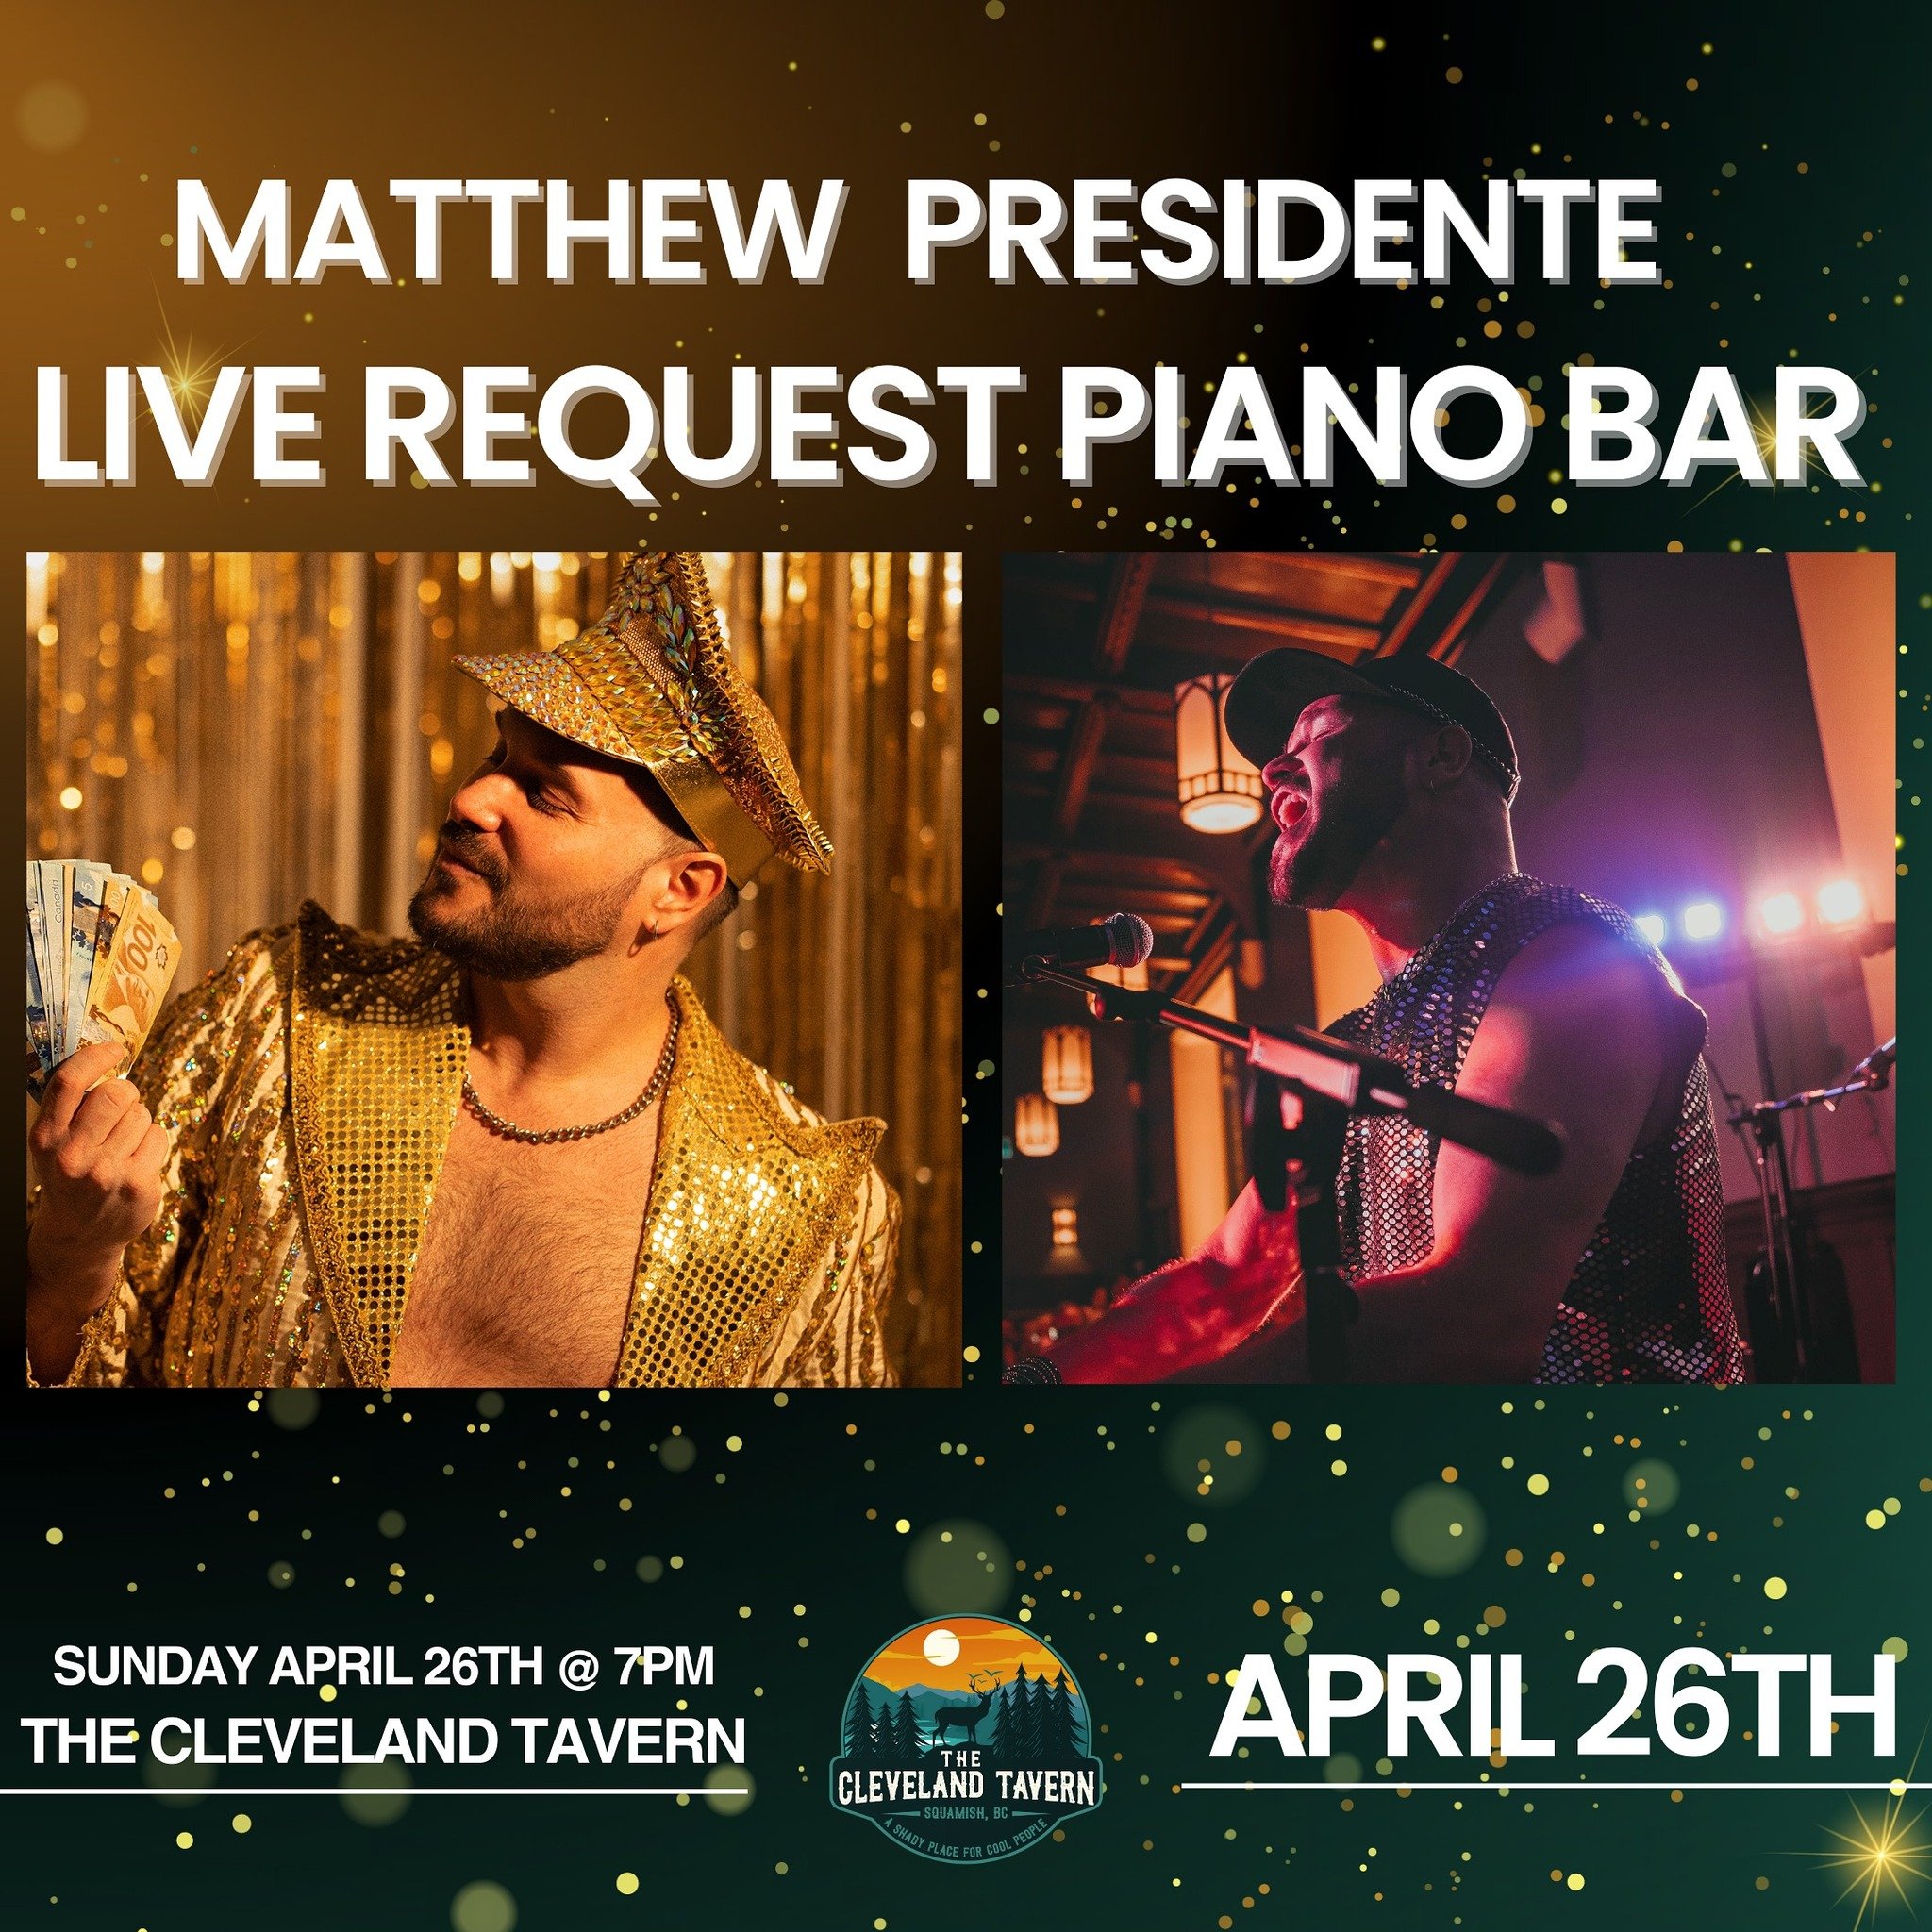 LIVE REQUEST PIANO BAR with @mattyprez is back again on April 26th at 7:00pm at the @clevelandtavern !!

This engaging show is lively and so much fun! 🍻